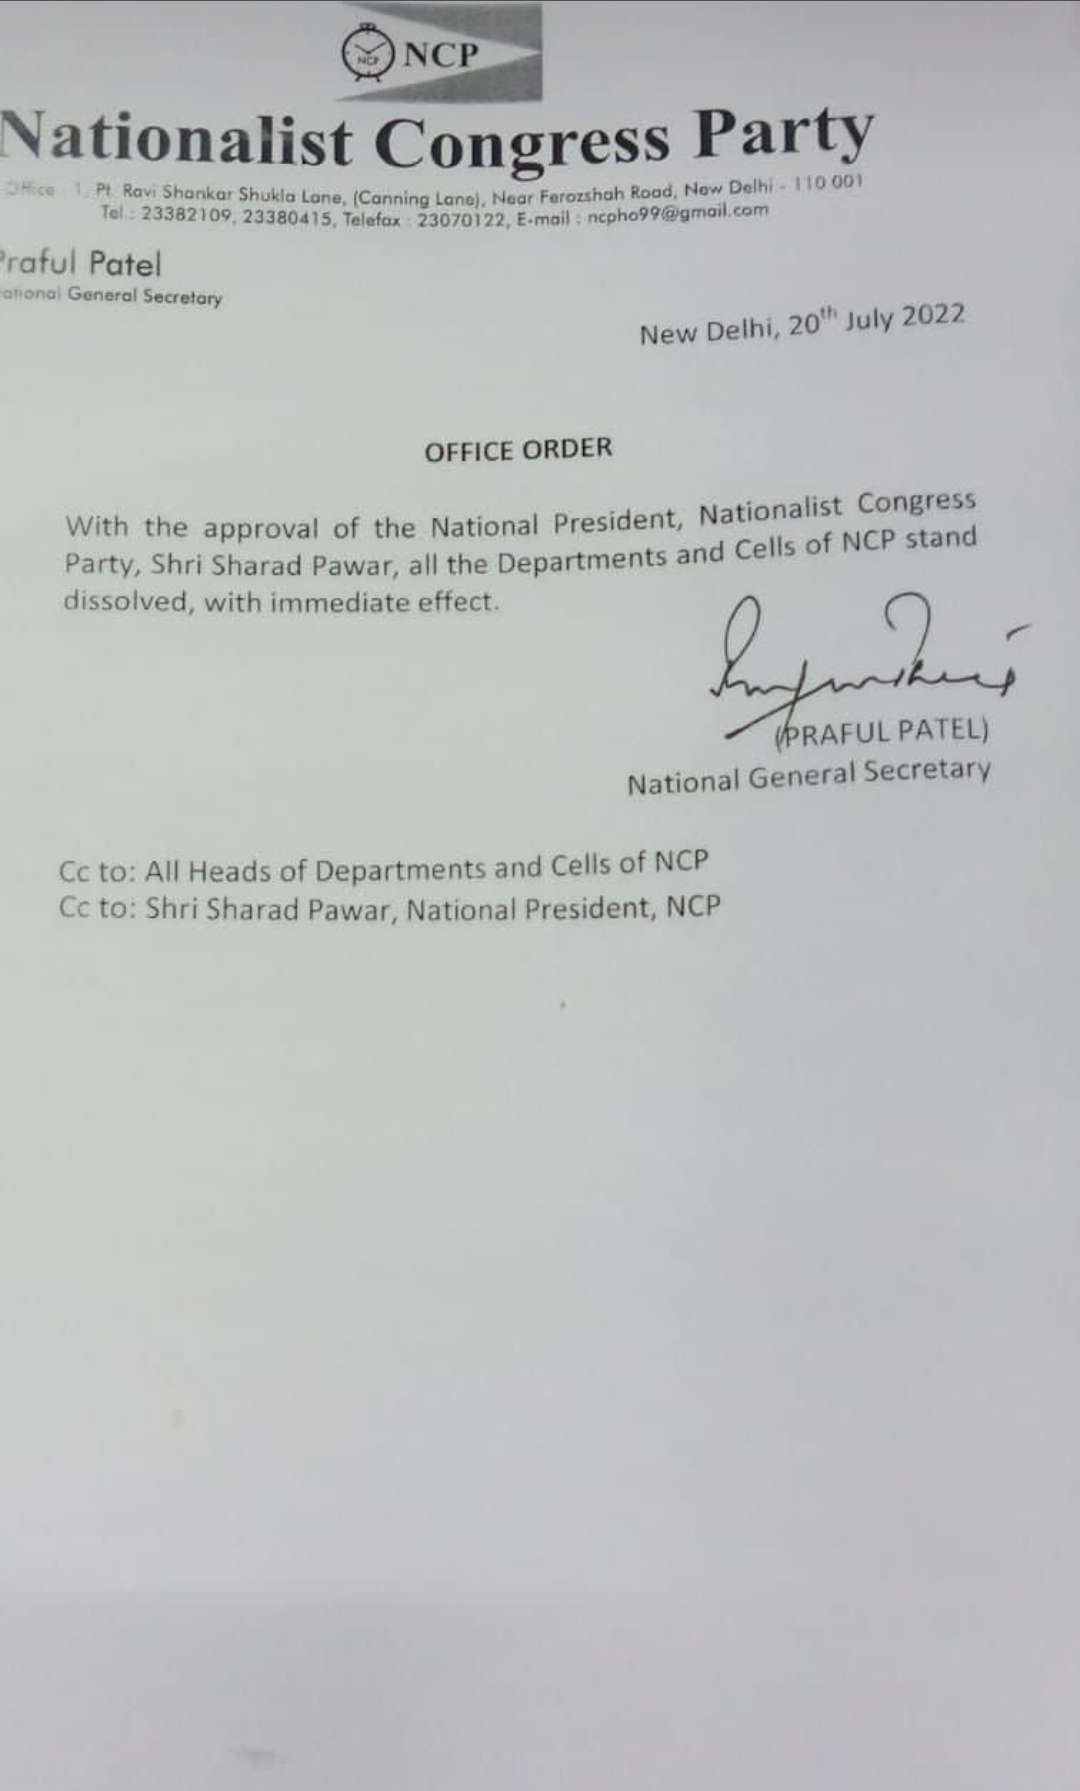 Sharad Pawar dissolves all departments, cells of the NCP